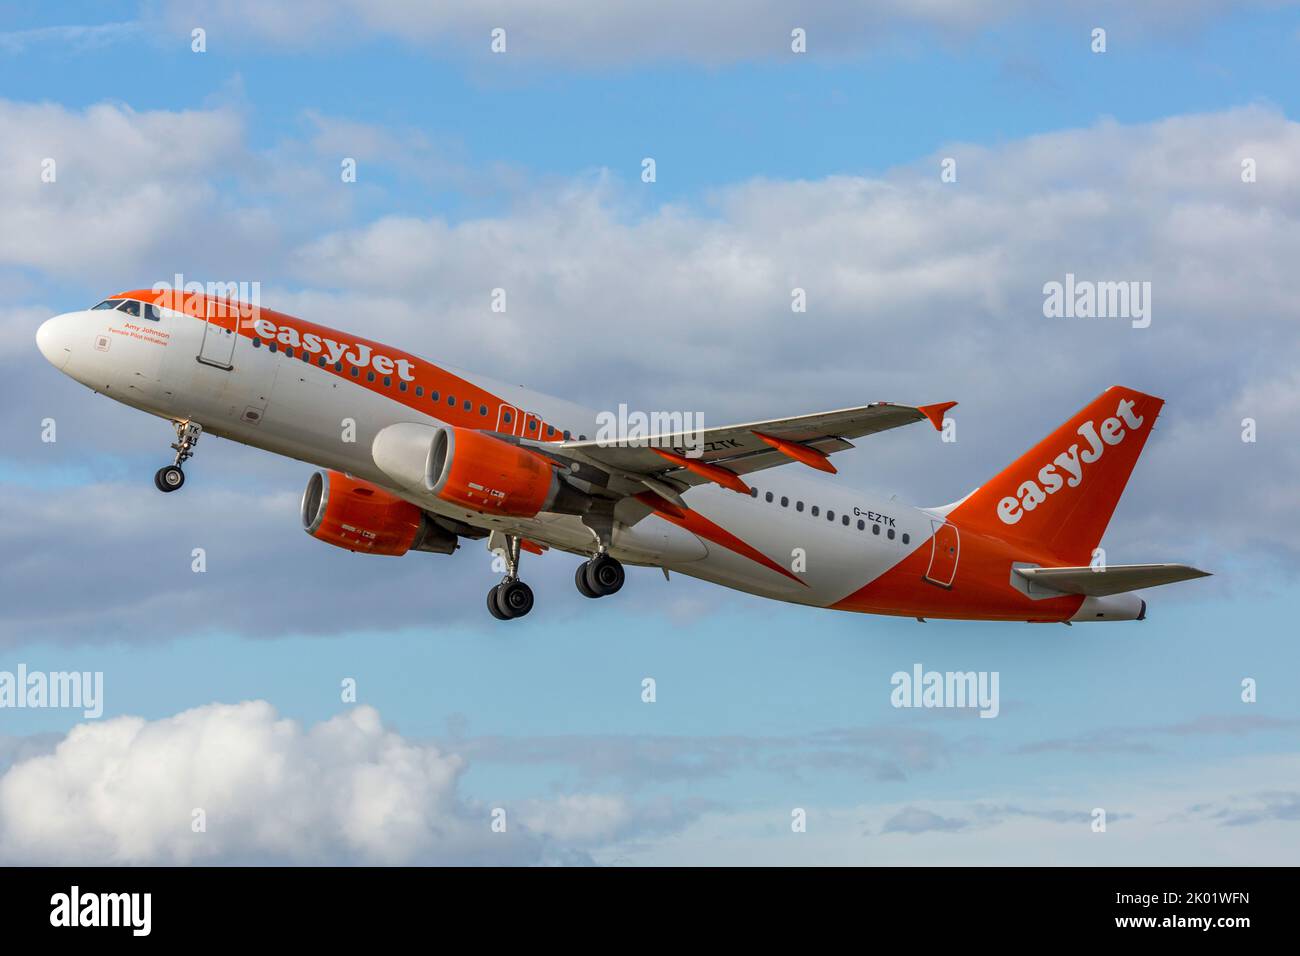 An Easyjet Airbus A320-200 Airliner, serial number G-EZTK, taking off from Bristol Lulsgate Airport in England. Stock Photo